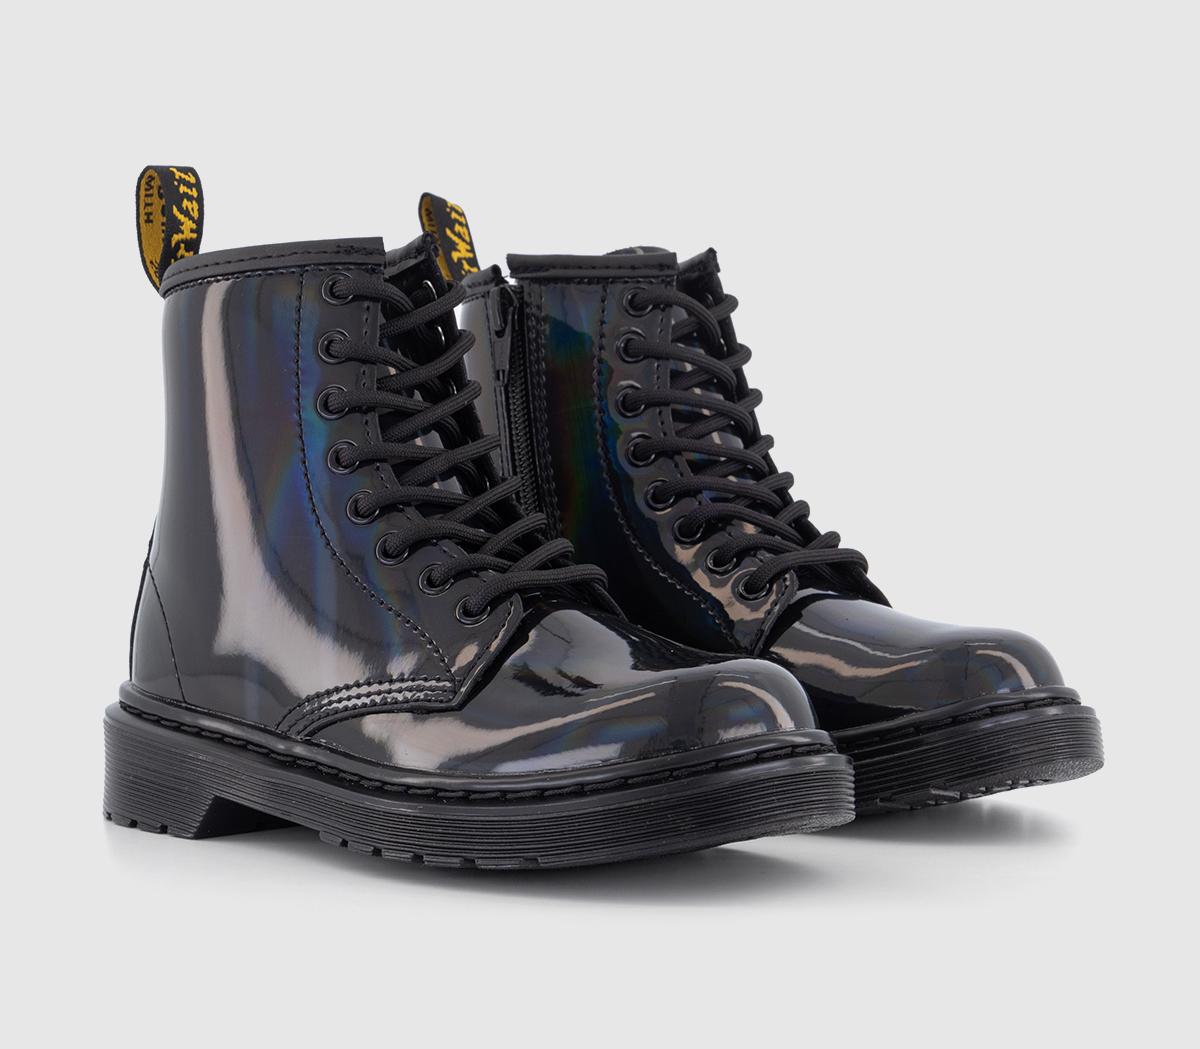 Dr. Martens Kids 1460 Junior Boots Black Rainbow, 12 Youth